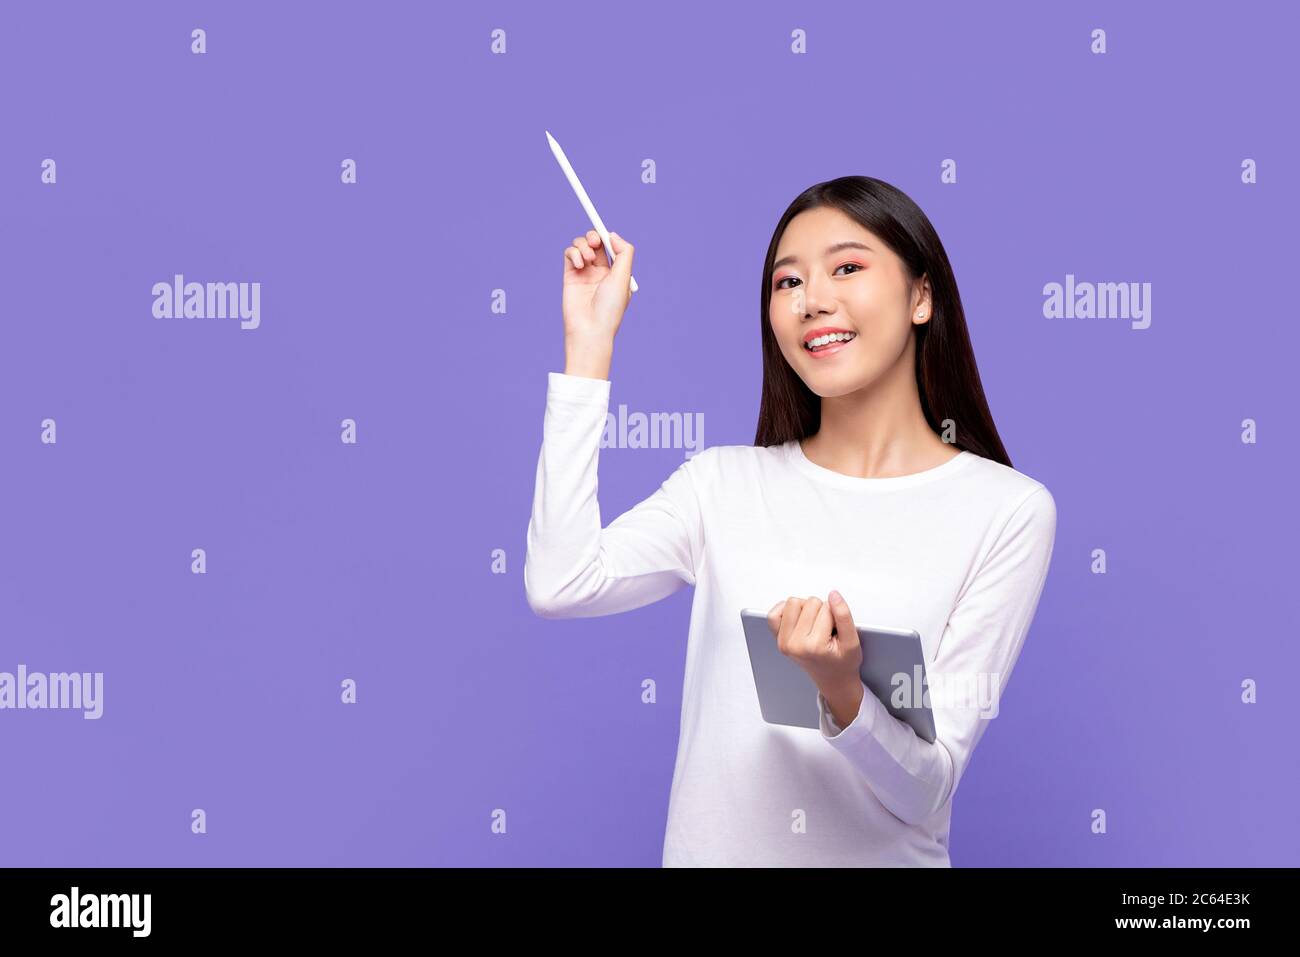 Smiling beautiful Asian woman in white attire pointing with stylus to copy space and holding digital tablet isolated on purple background Stock Photo